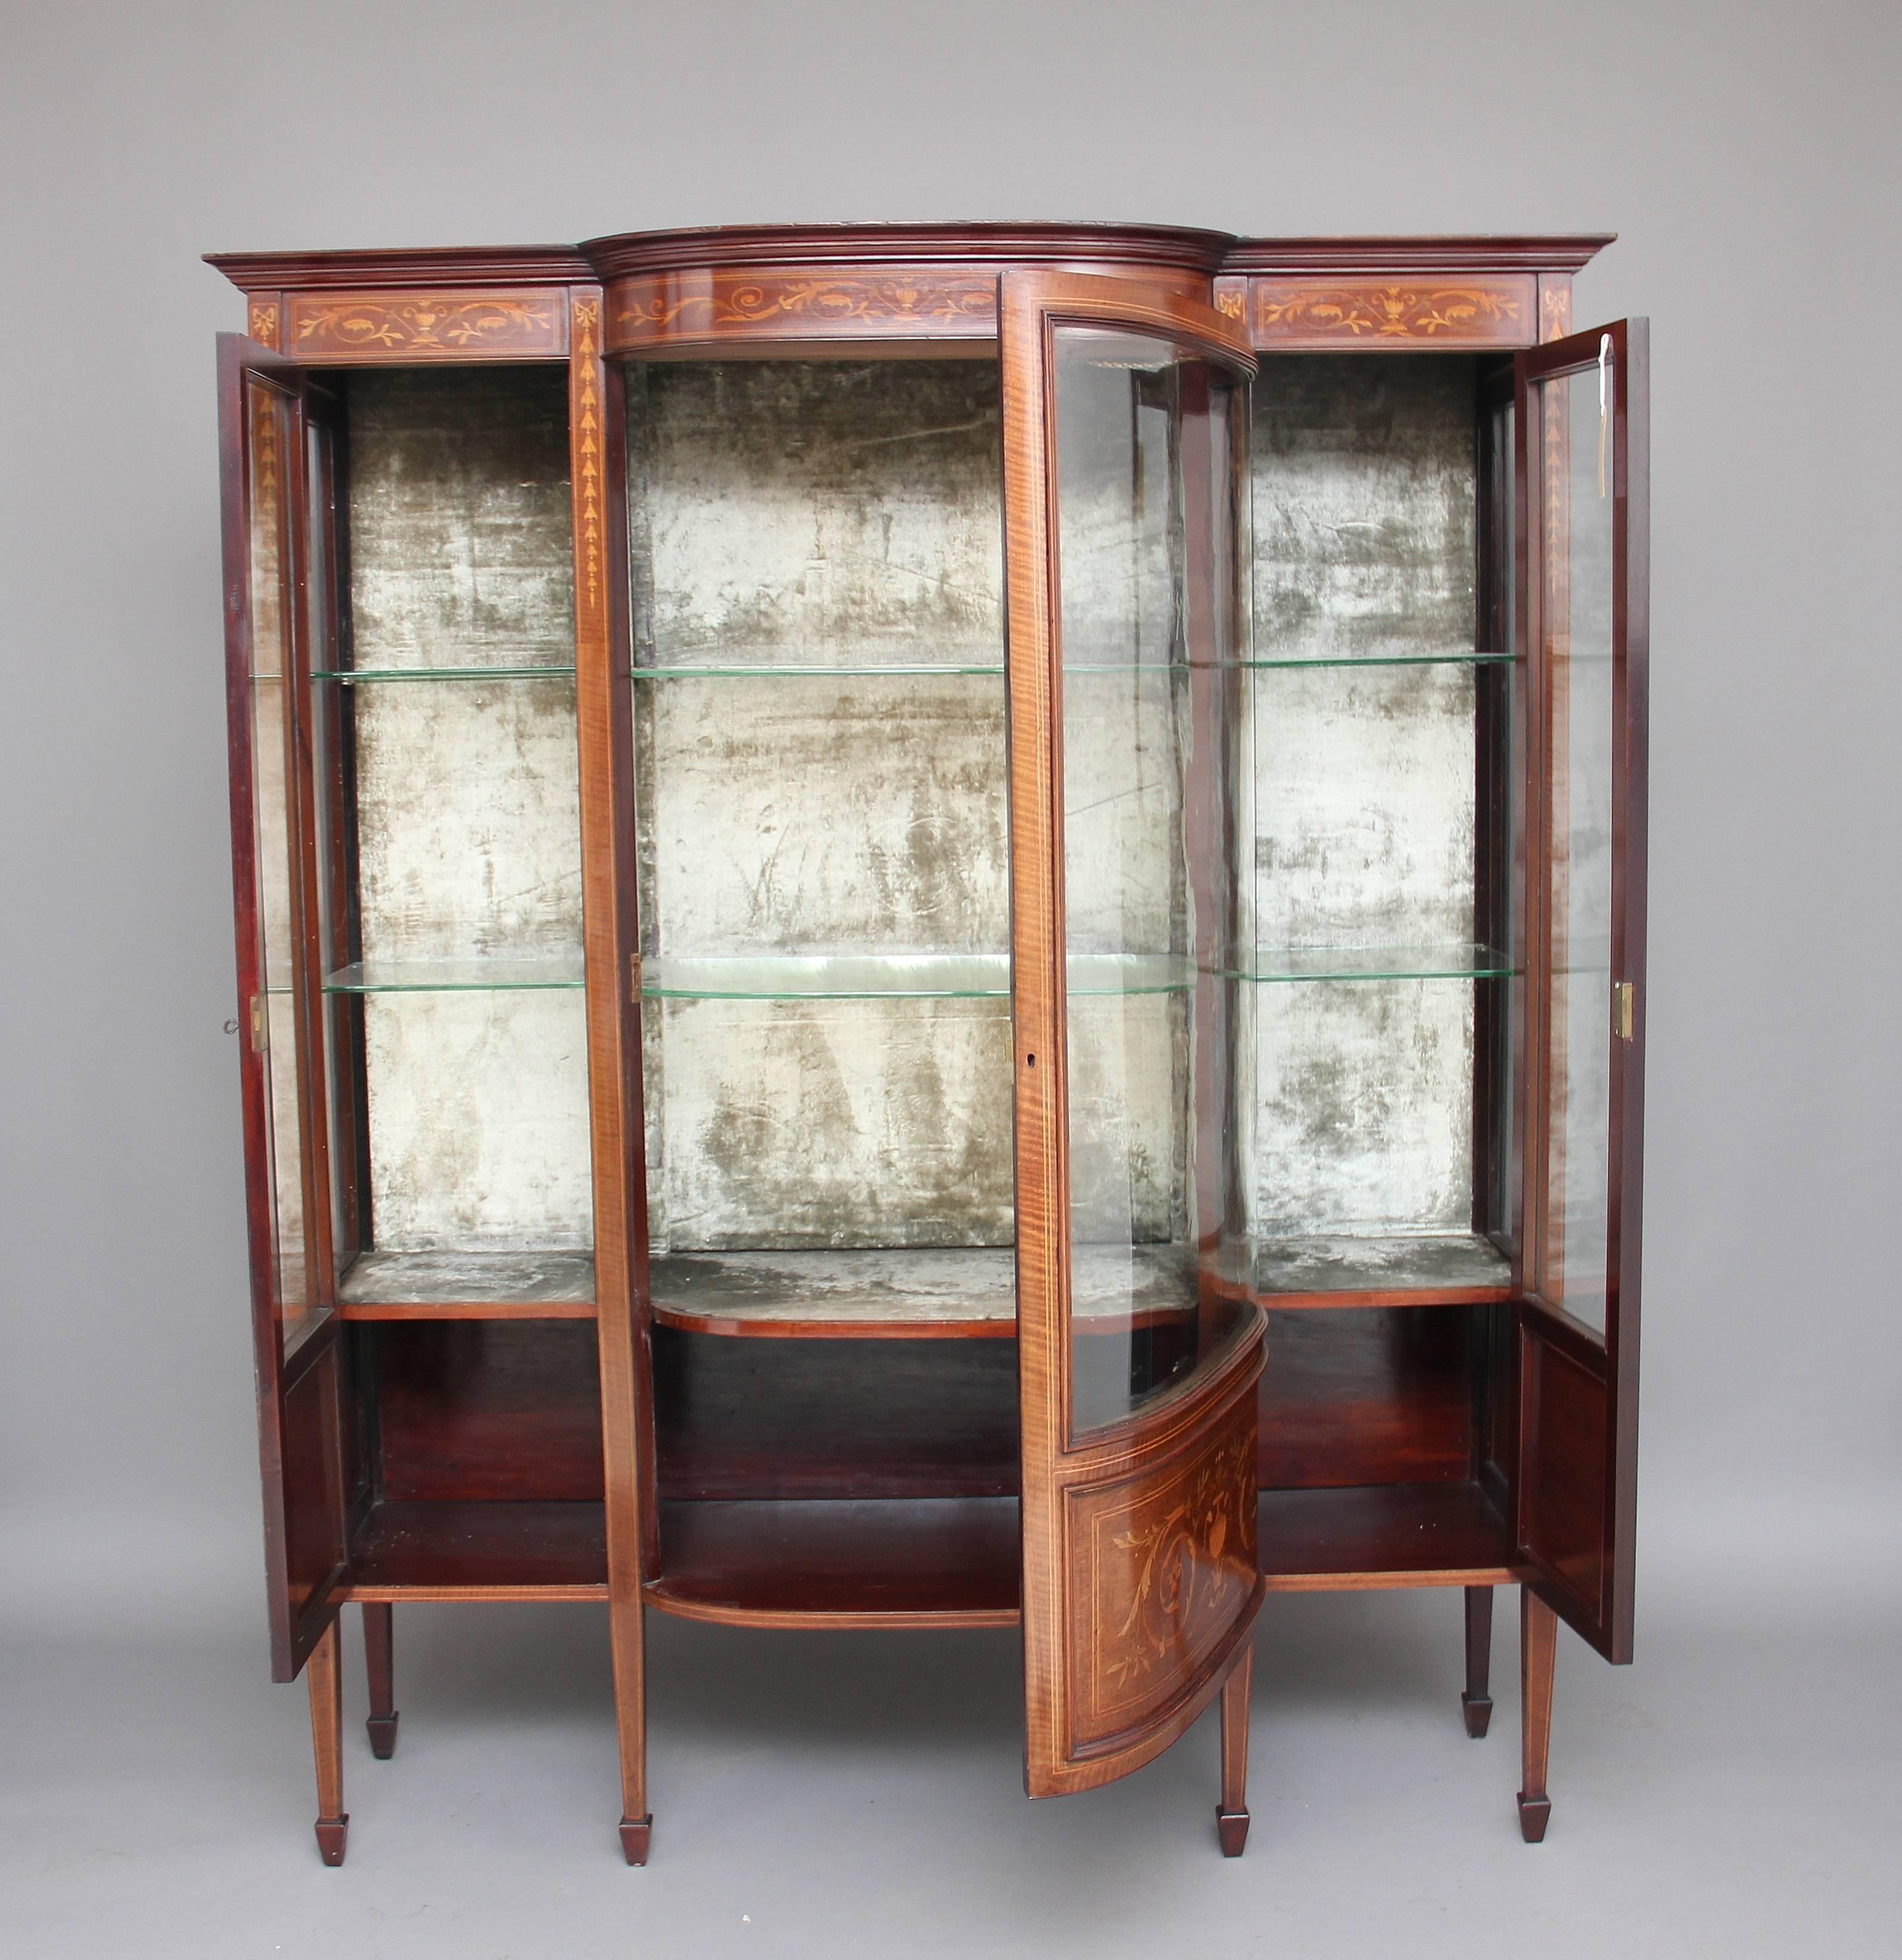 Early 20th century mahogany and inlaid display cabinet, the stepped moulded cornice above an inlaid frieze, with three glazed doors below, the middle bow fronted glazed door flanked either side by single glazed doors, each door opening to reveal two